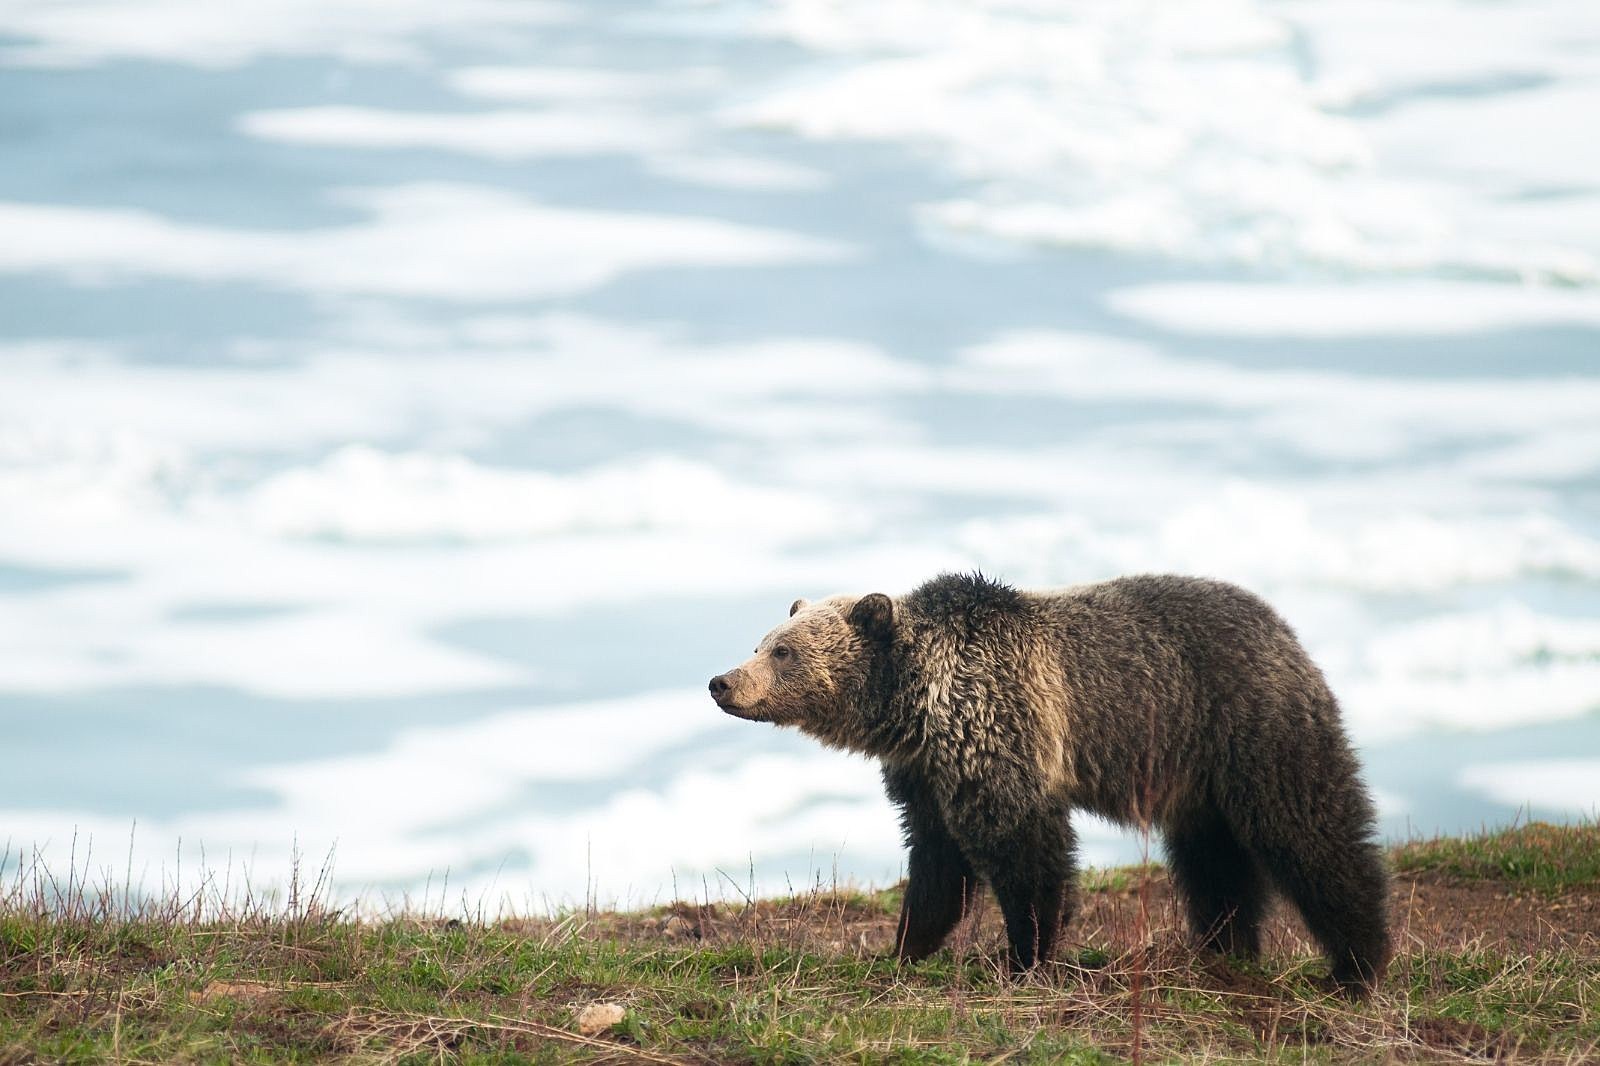 Hunters report concerning uptick in grizzly bear sightings